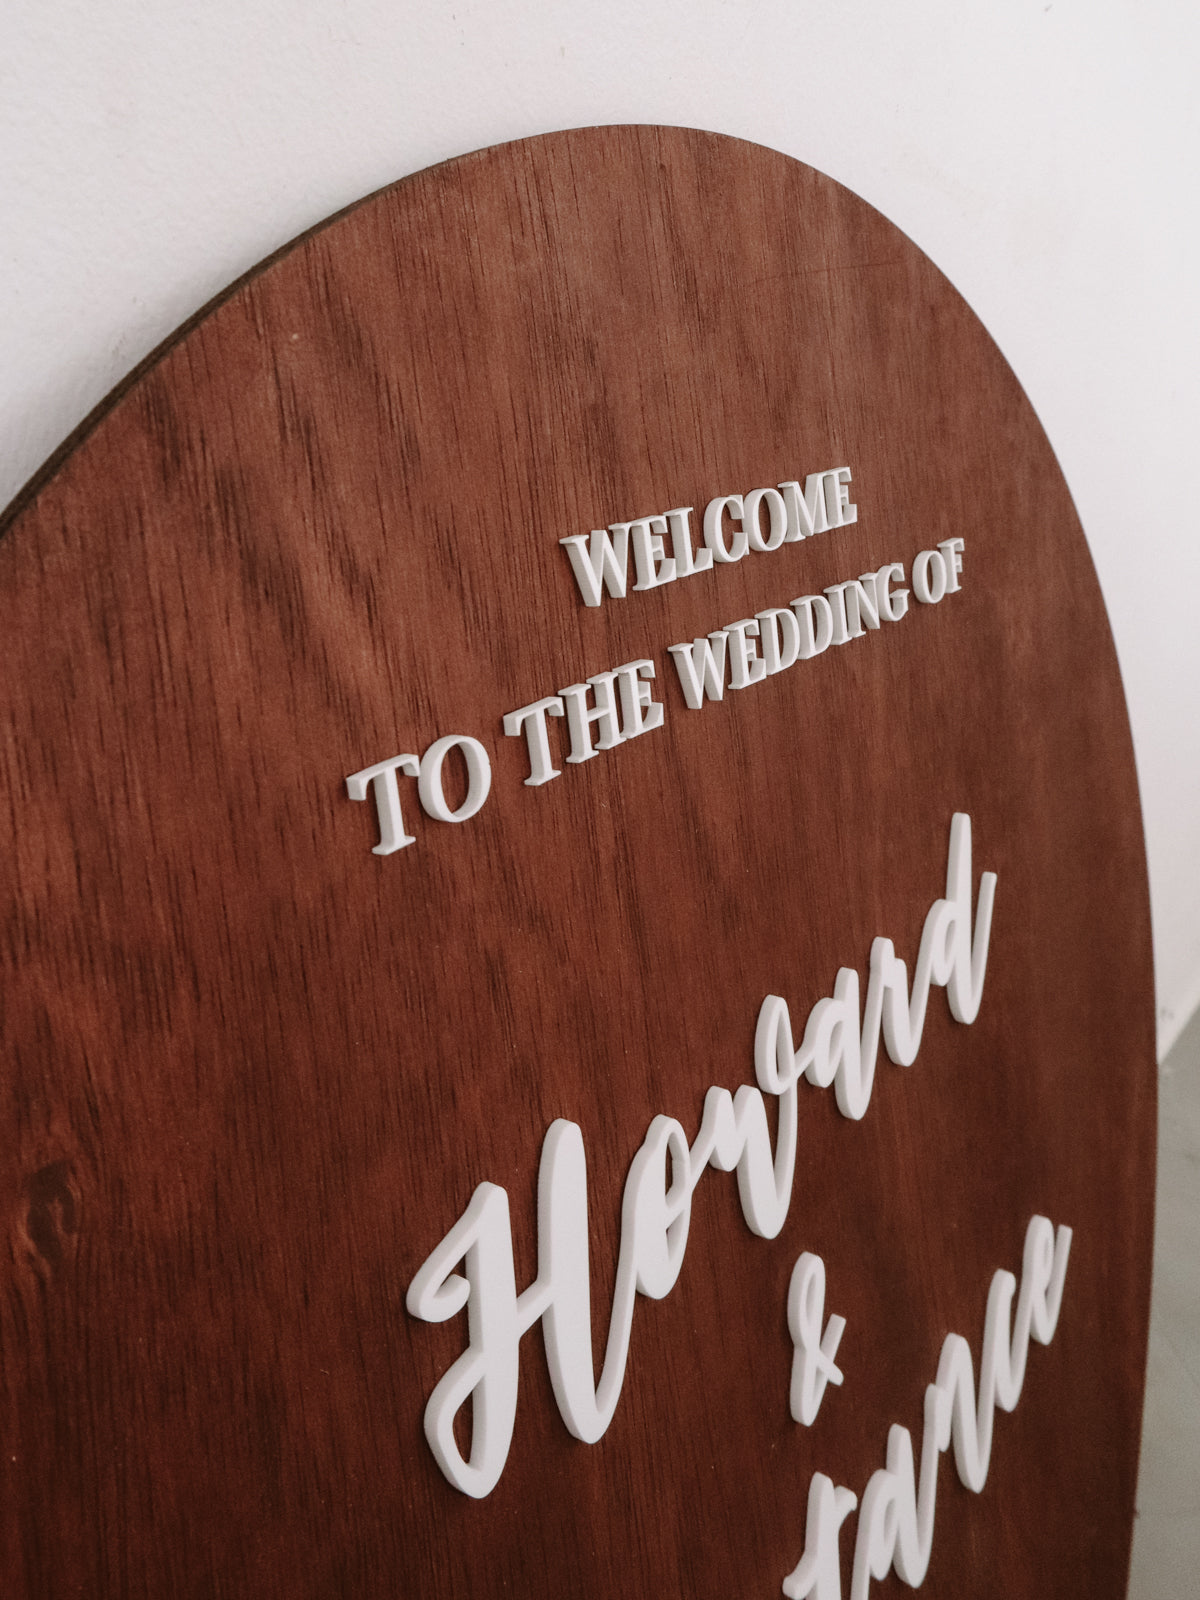 Wood Wedding Welcome Round Sign with 3D text (Semi-Custom)